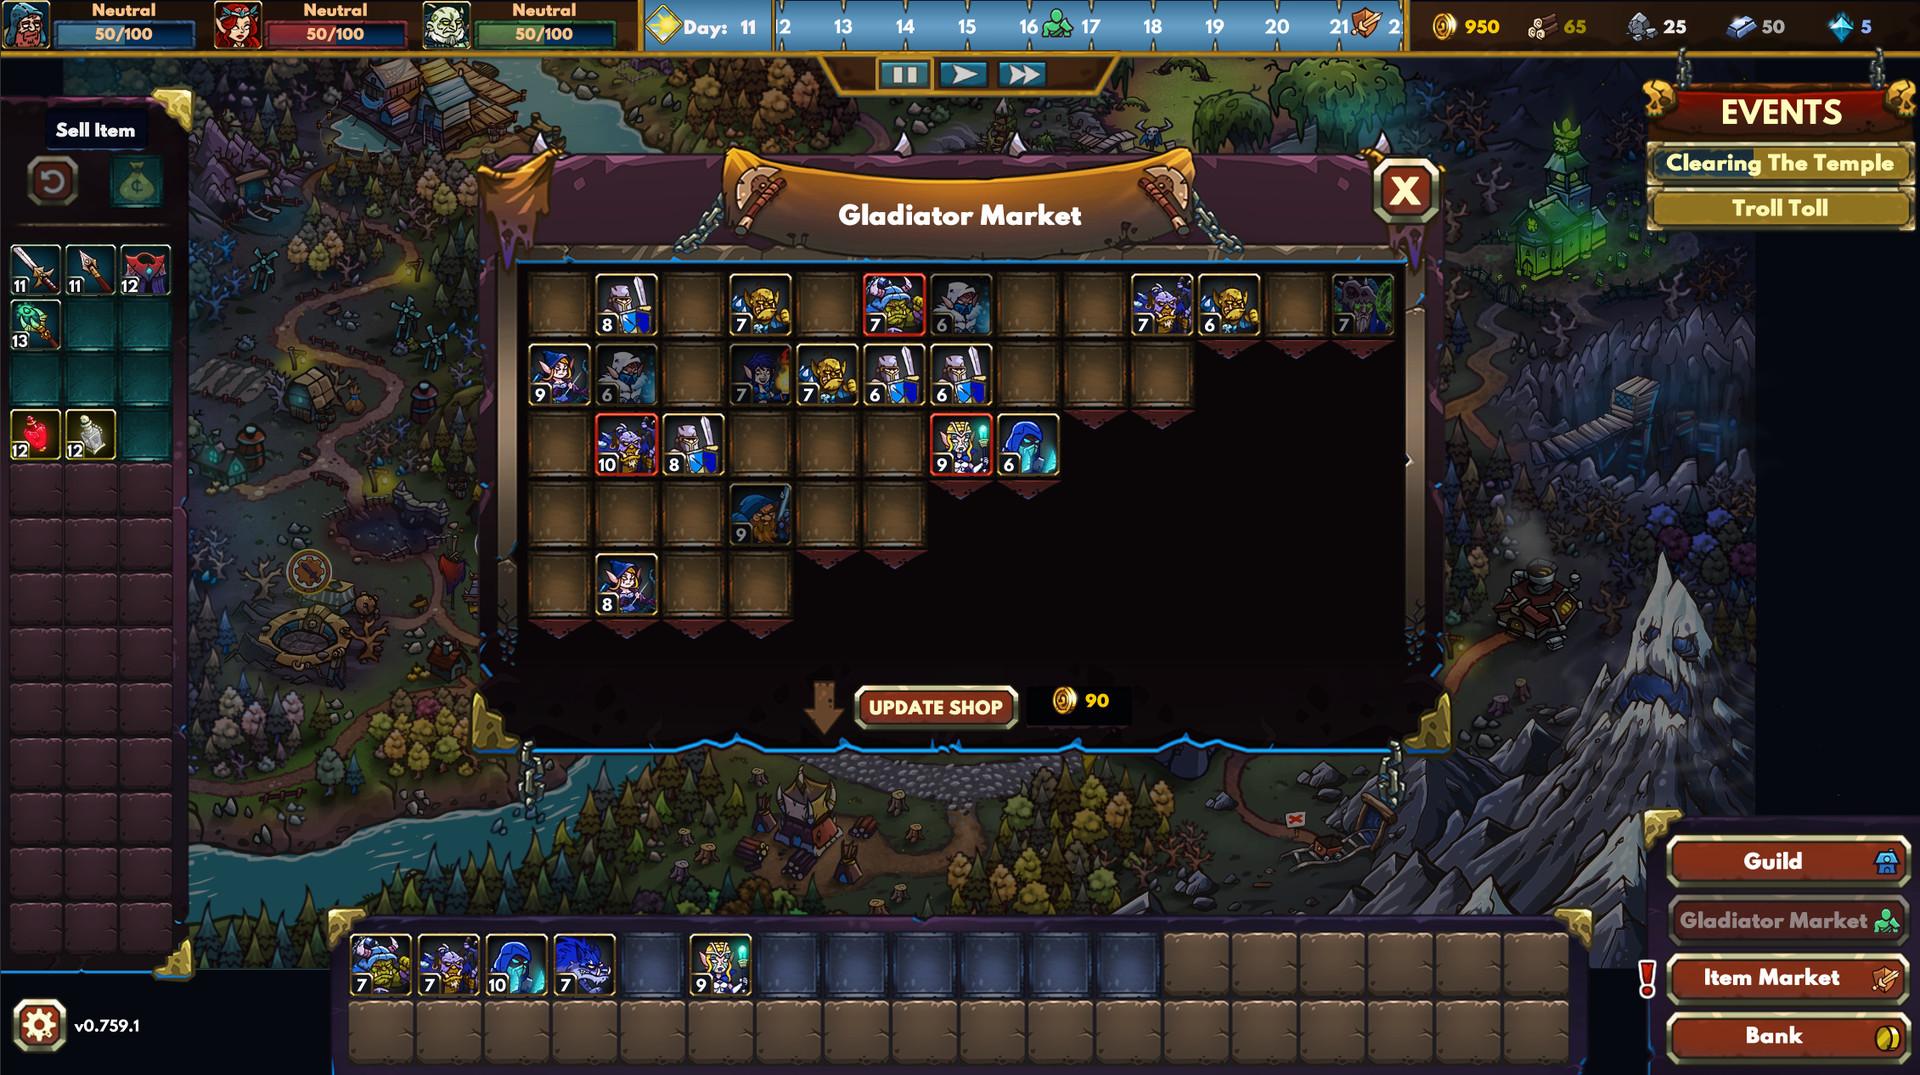 Screenshot №8 from game Gladiator Guild Manager